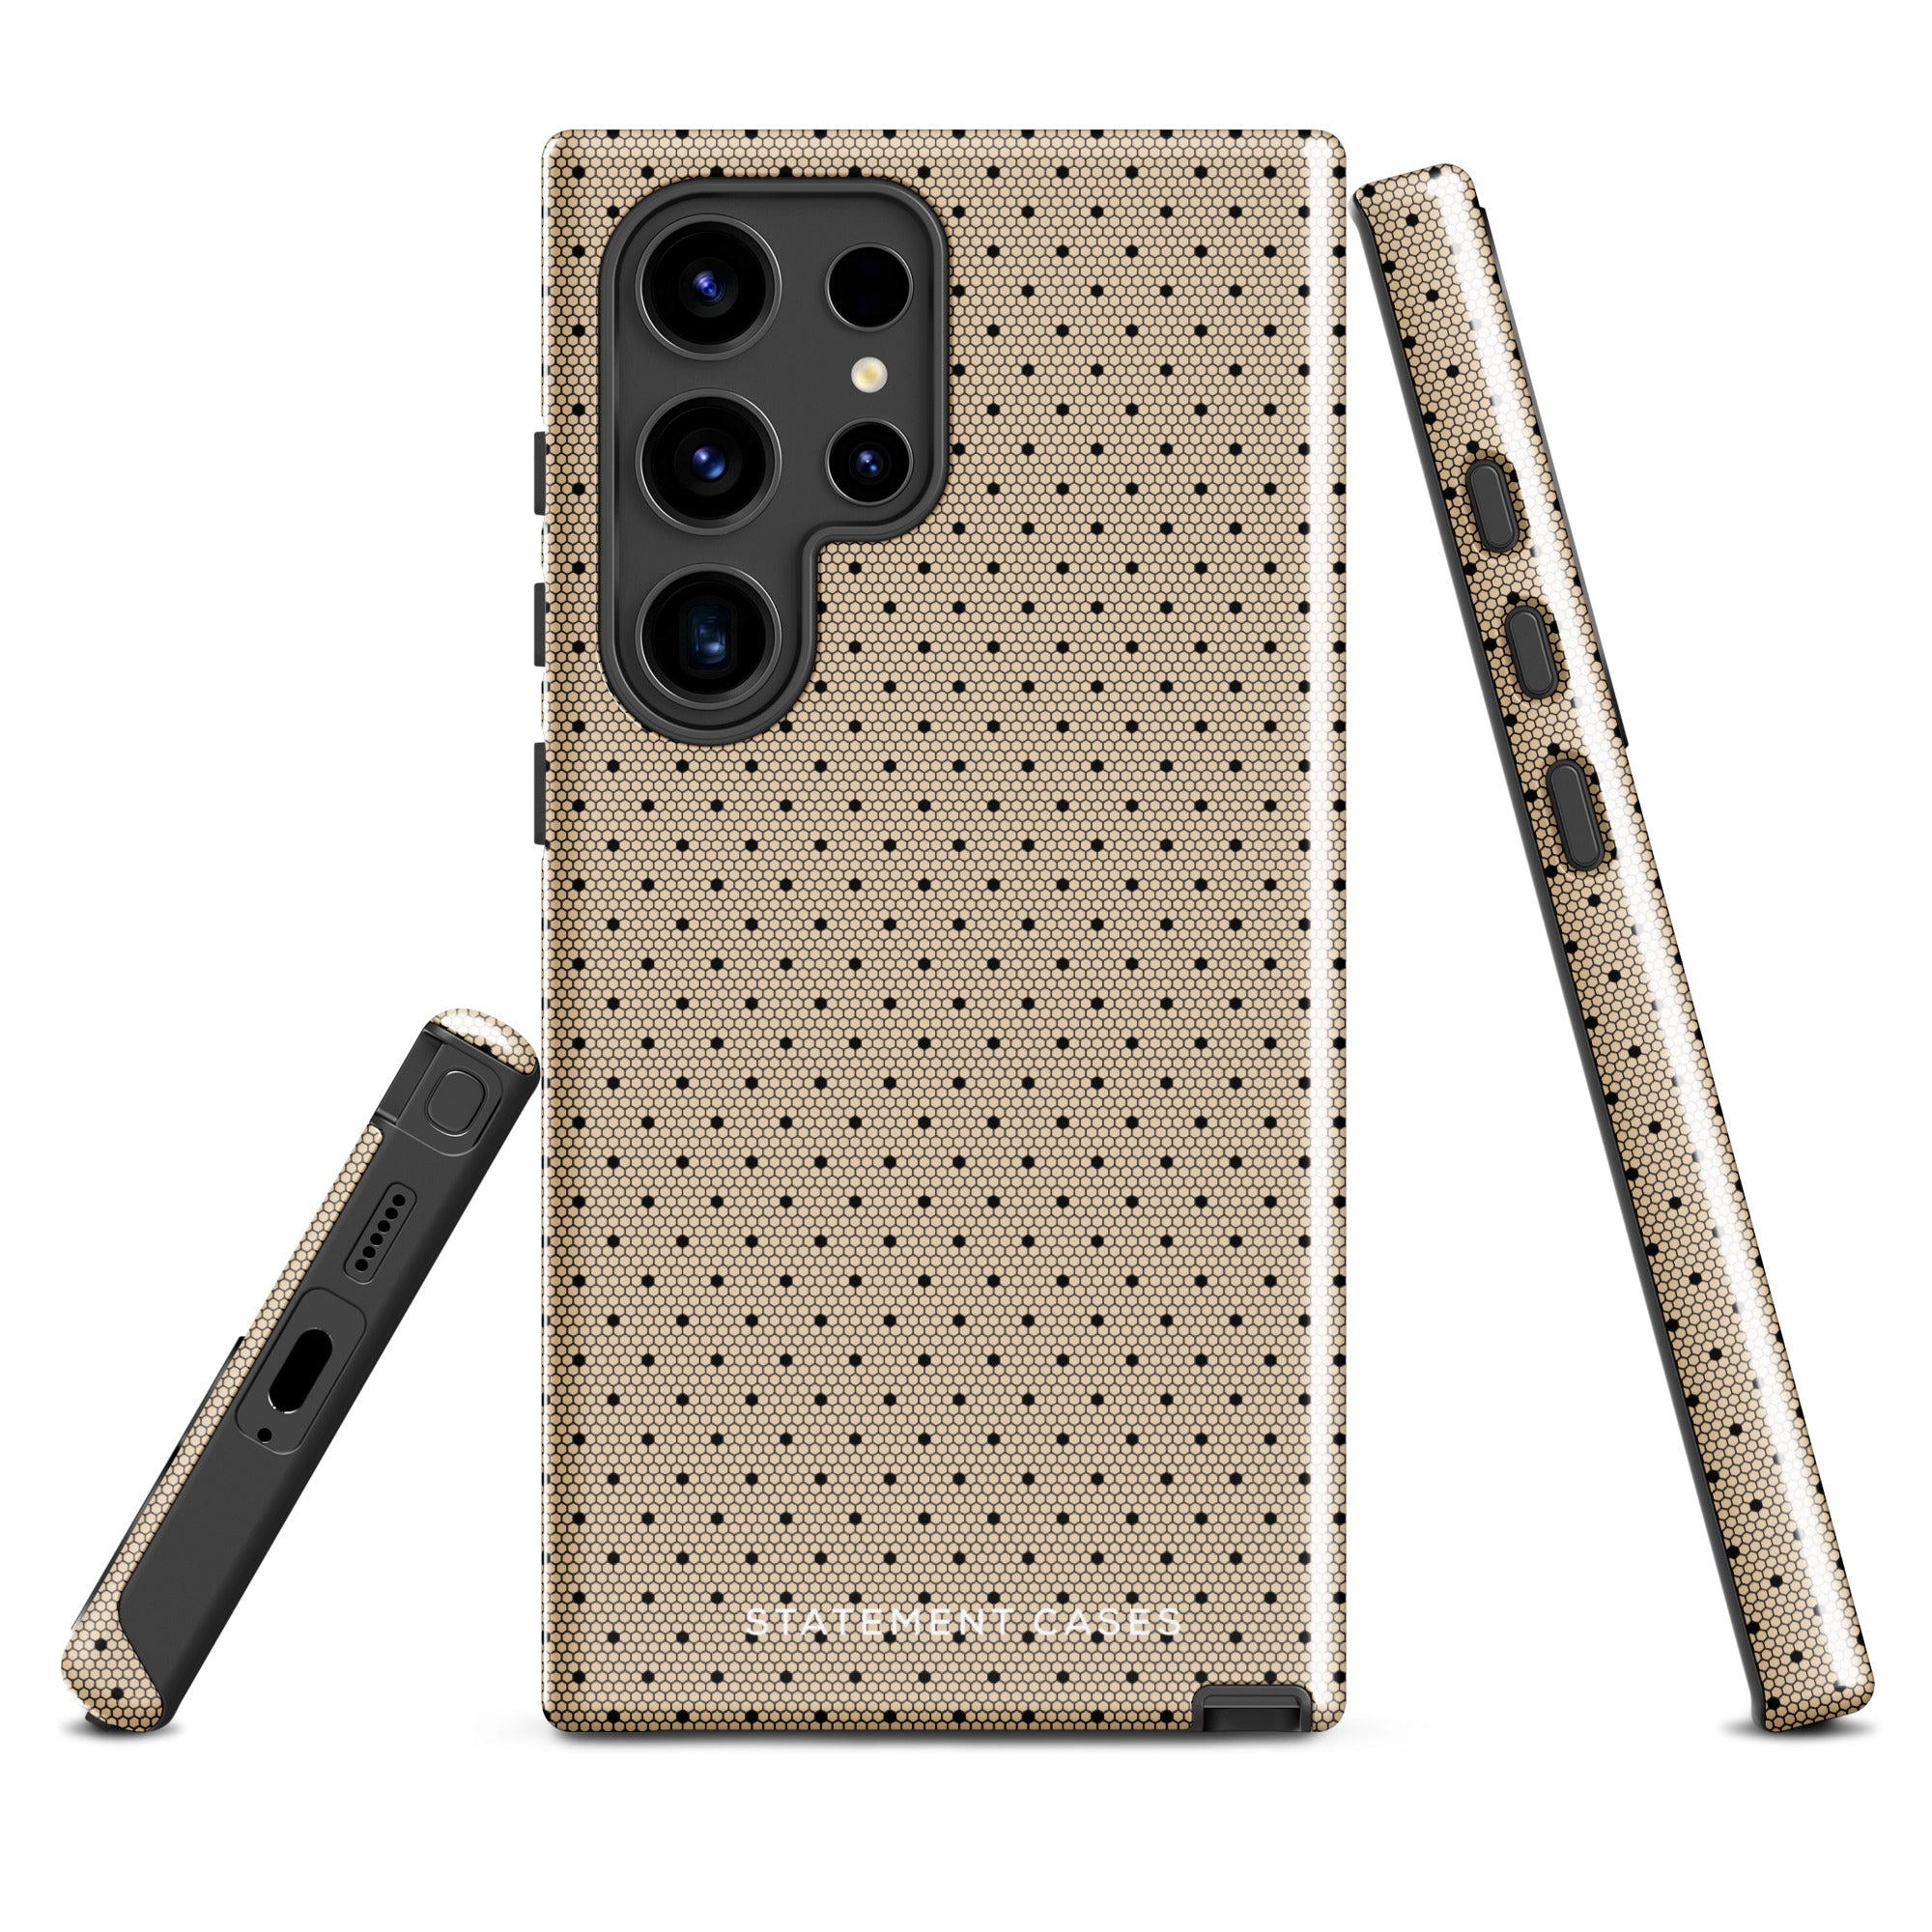 A stylish beige, shock-absorbing phone case with a perforated pattern, designed for a phone with four camera lenses. The dual-layer case has a textured surface and precise cutouts for the camera and buttons. The brand name "Statement Cases" is visible at the bottom of the impact-resistant Delicate Elegance for Samsung.